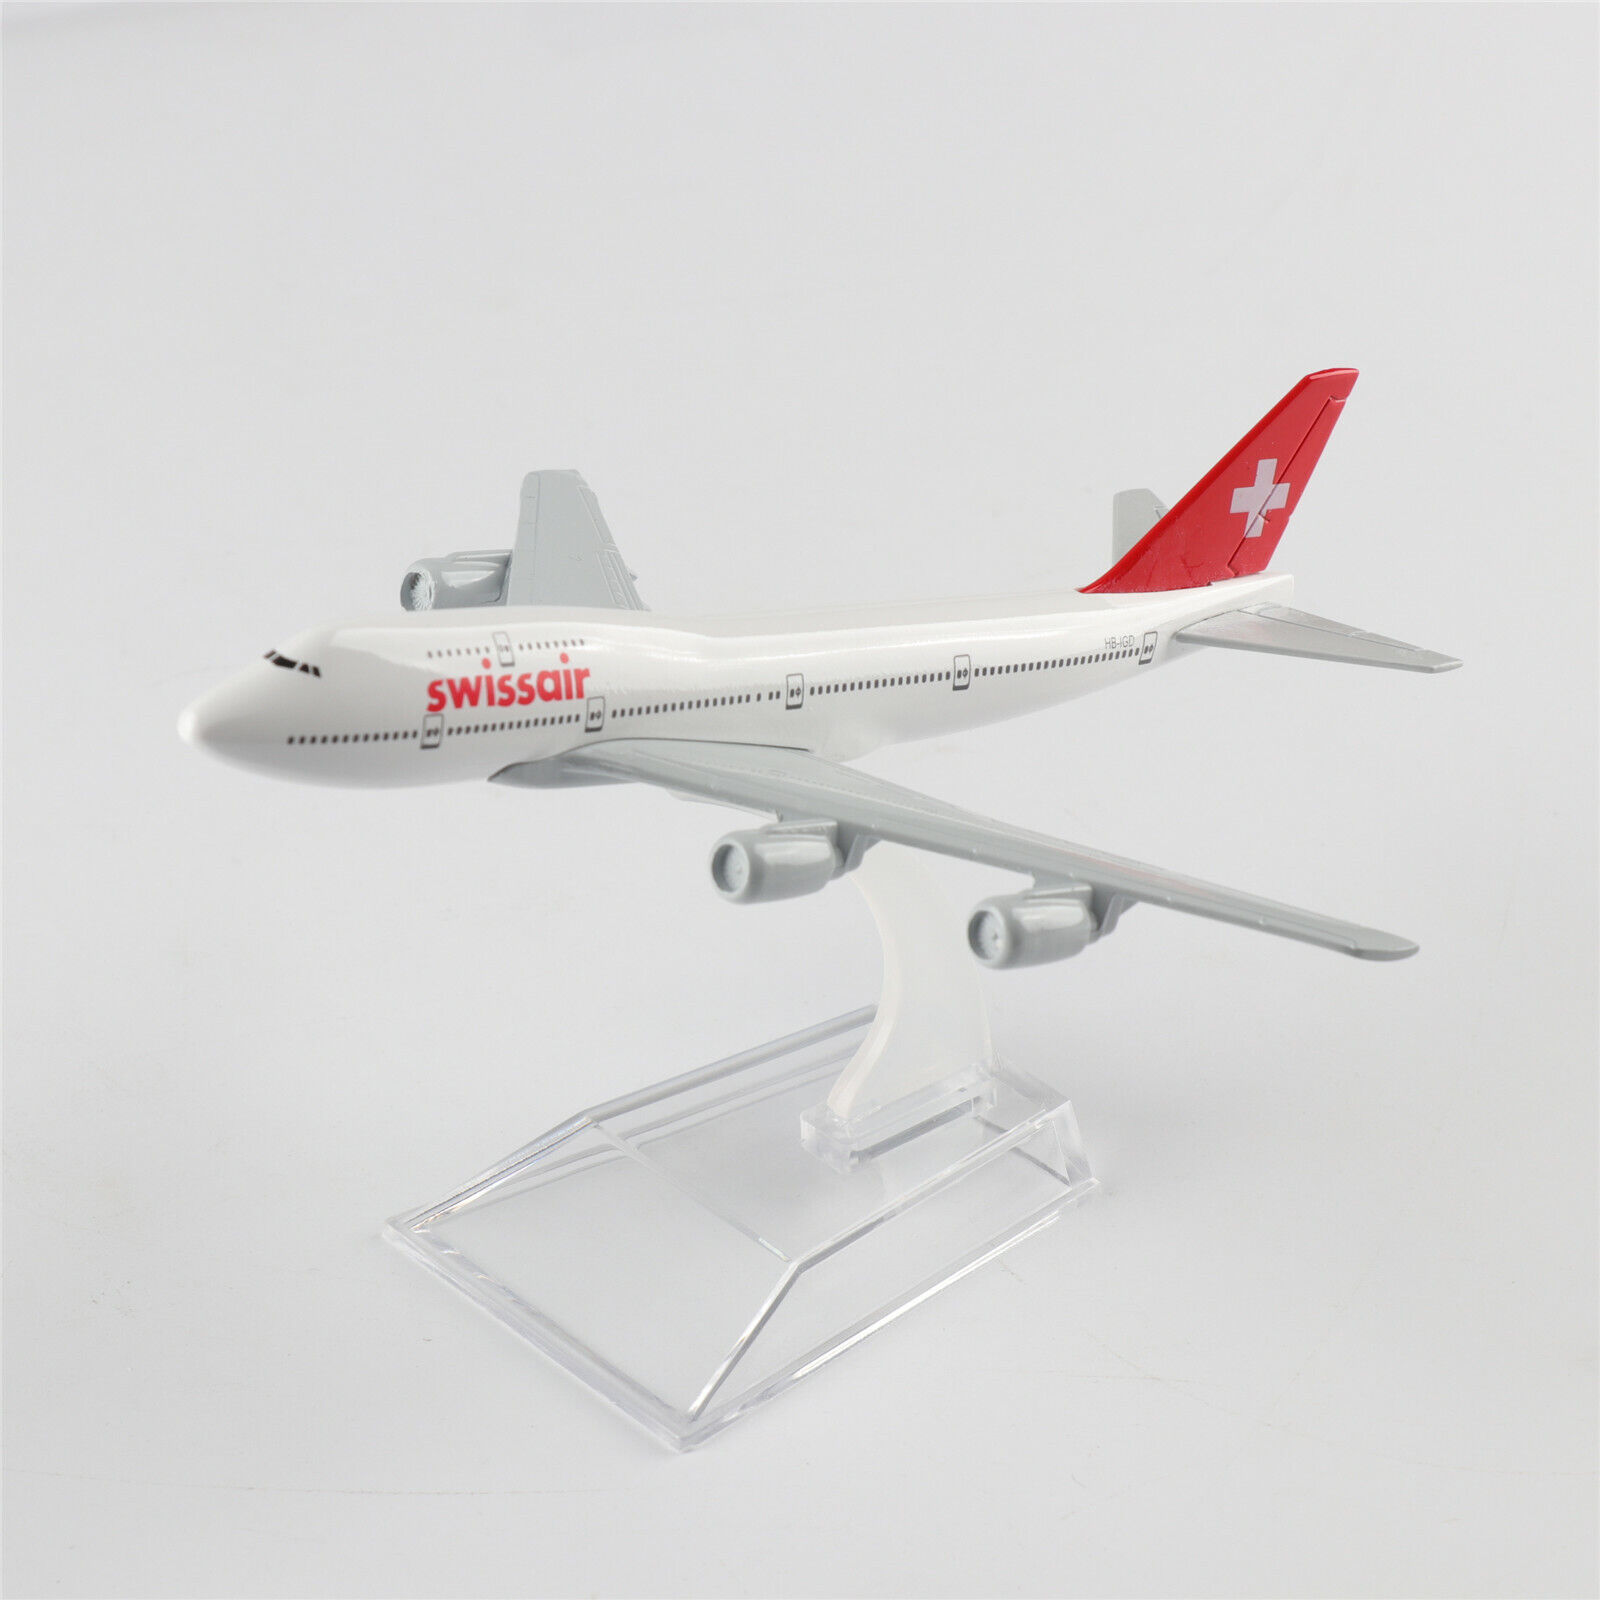 New 16cm Aircraft Plane Boeing 747 Swissair Airlines Aircraft Diecast Model